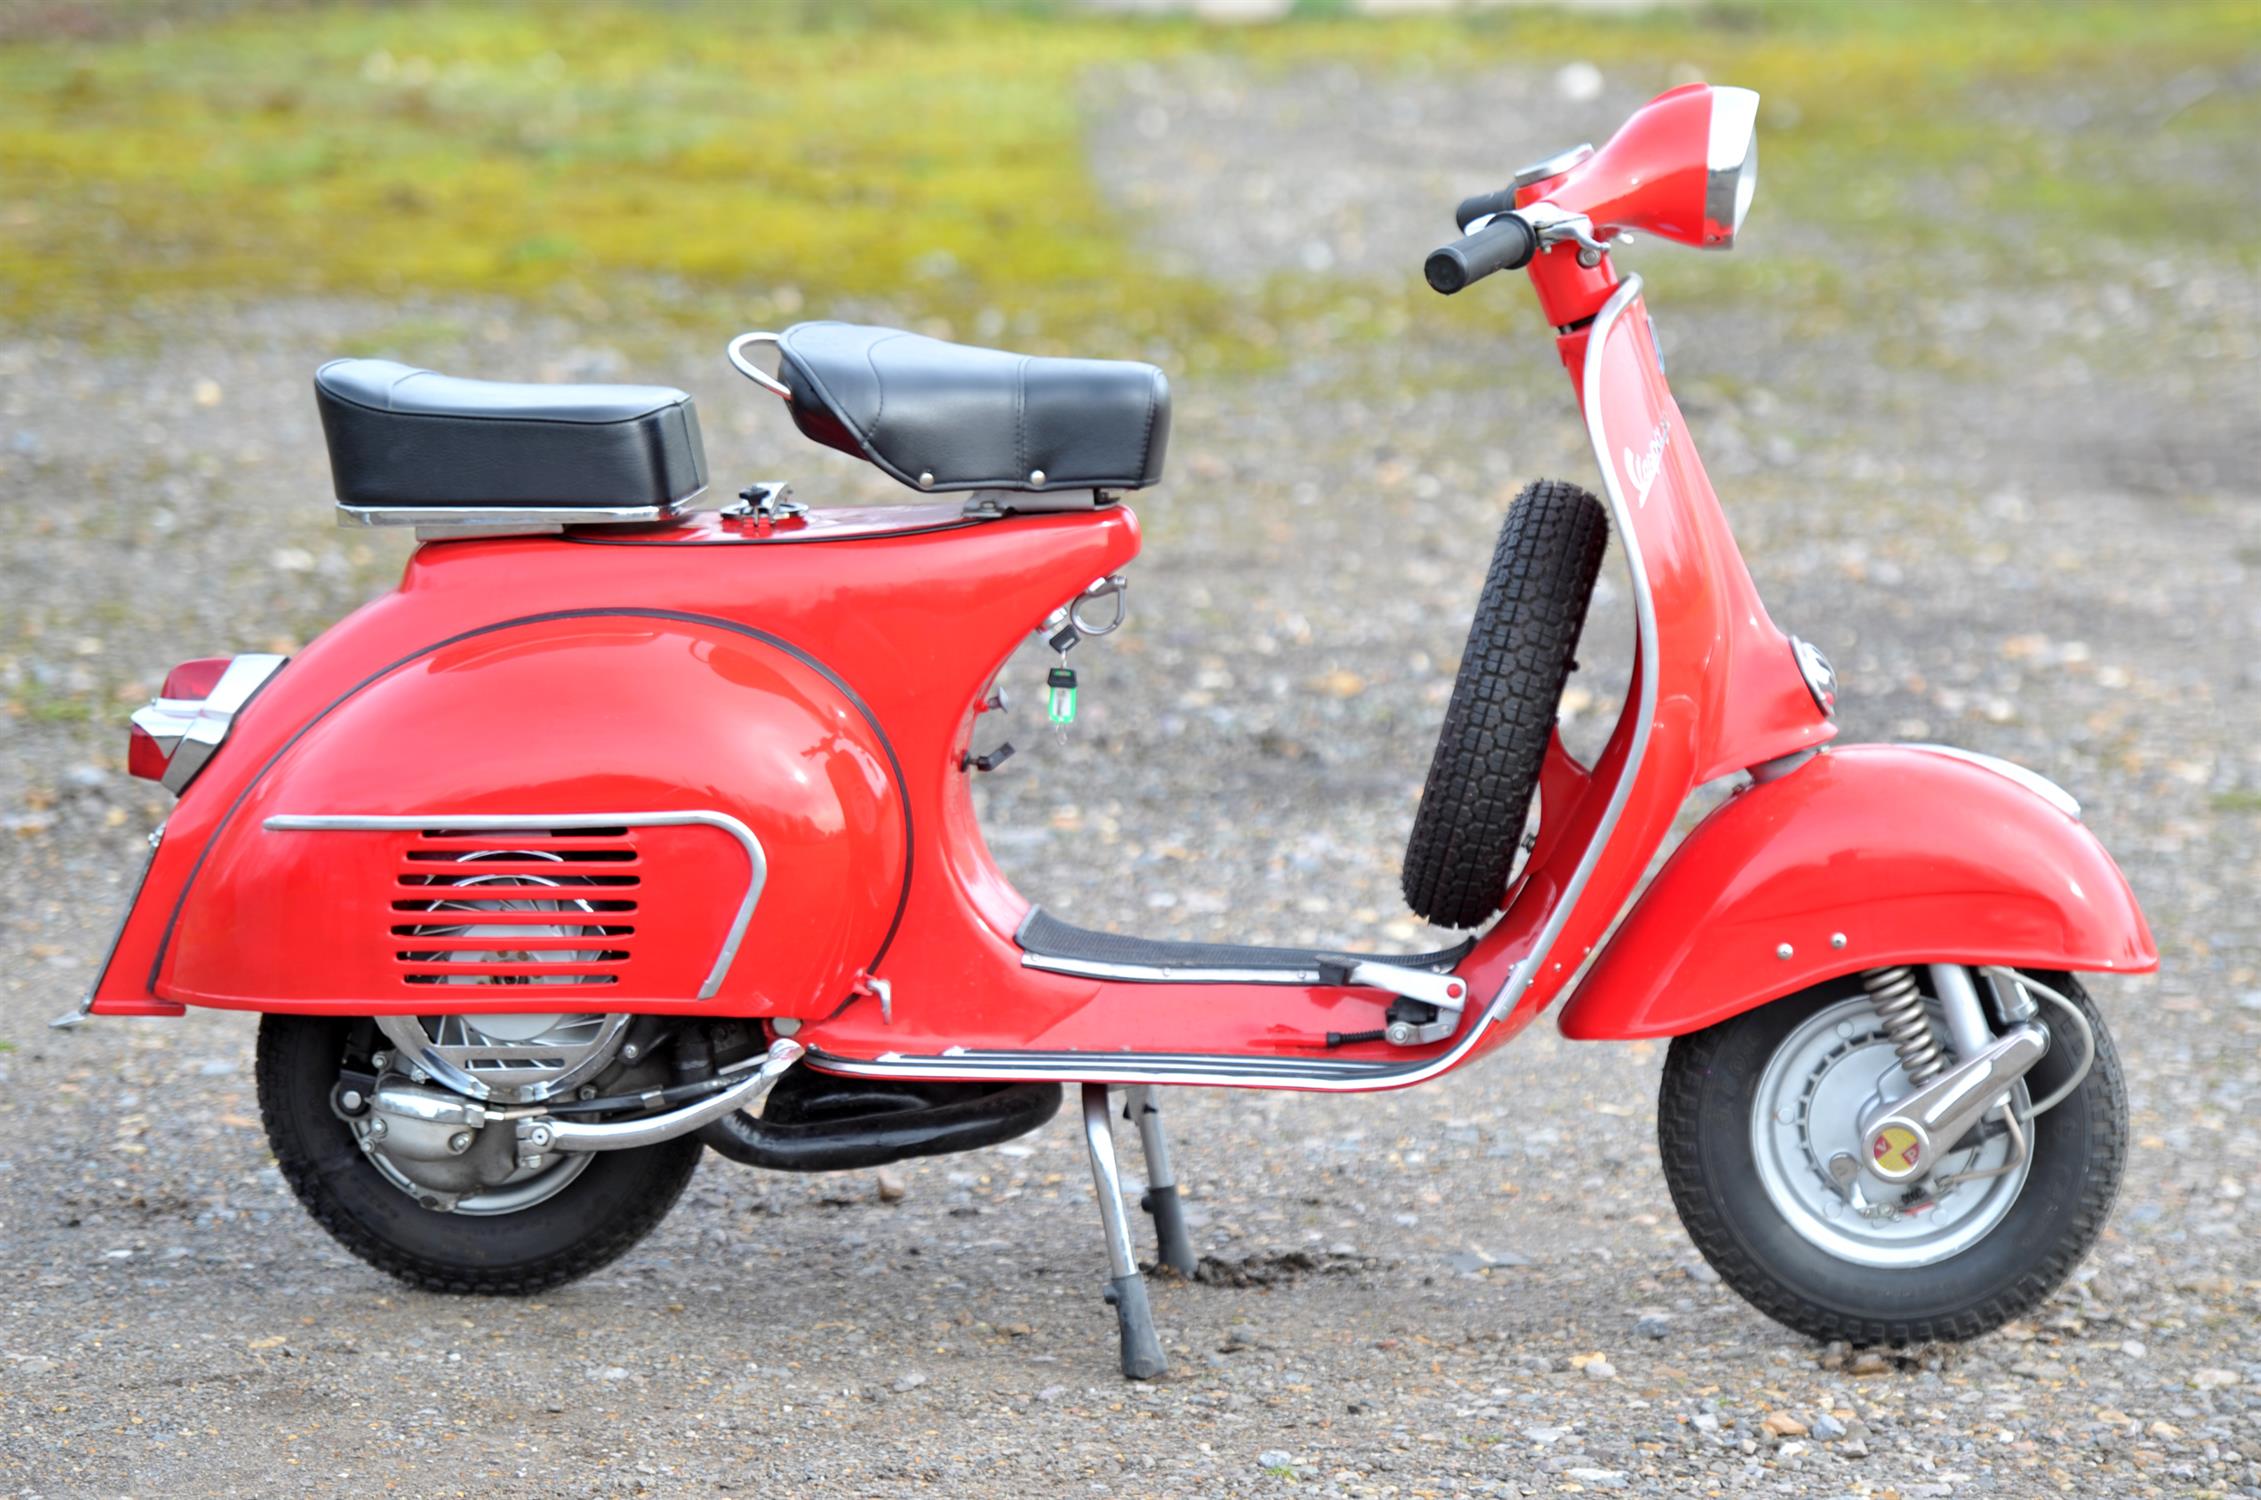 1961 Vespa VBB Standard 150cc 4 Speed. Registration number: 864 XVN. It was imported into the UK